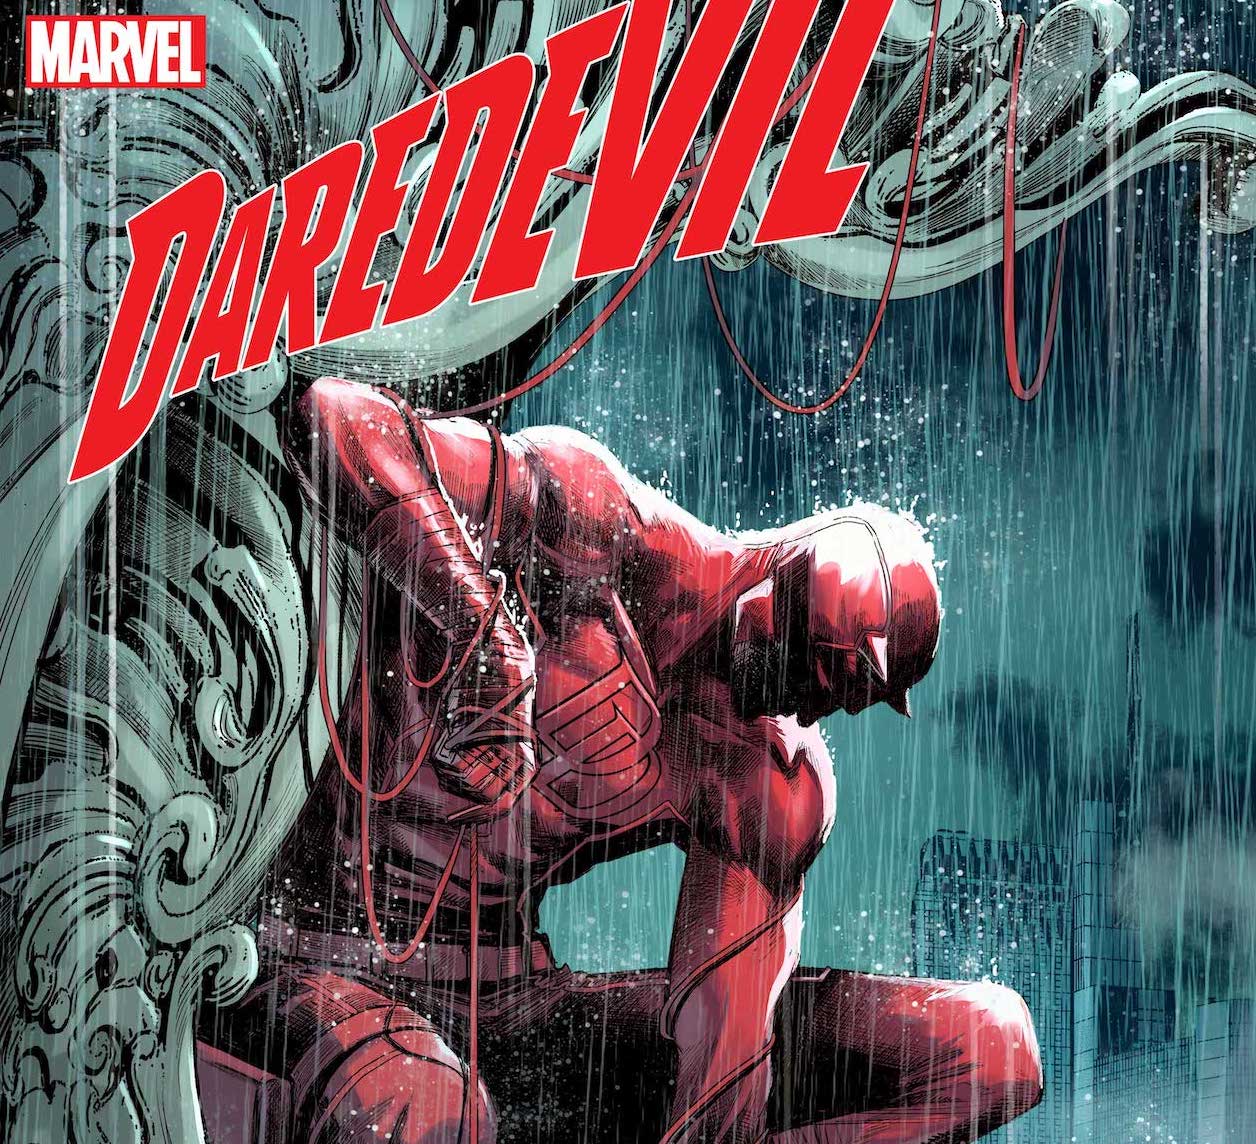 'Daredevil' #1 launching June 2022 by Chip Zdarsky & artist Marco Checchetto